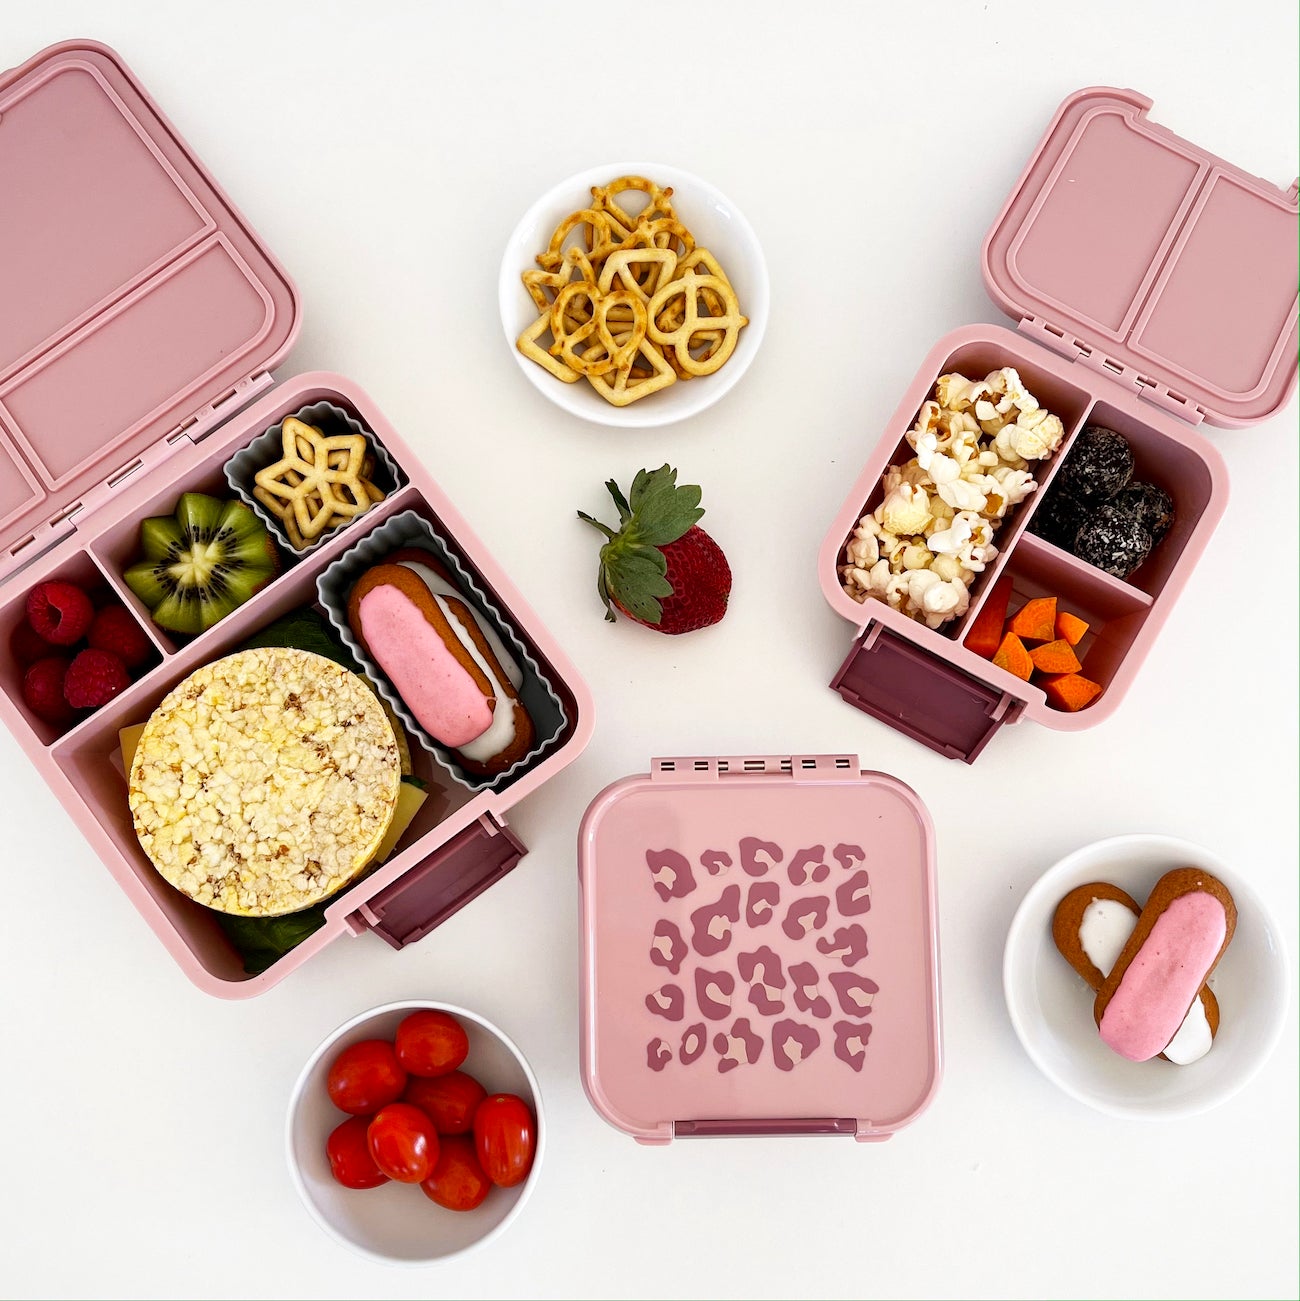 Little Lunch Box Co Leakproof Bento Lunch Box - Bento Three